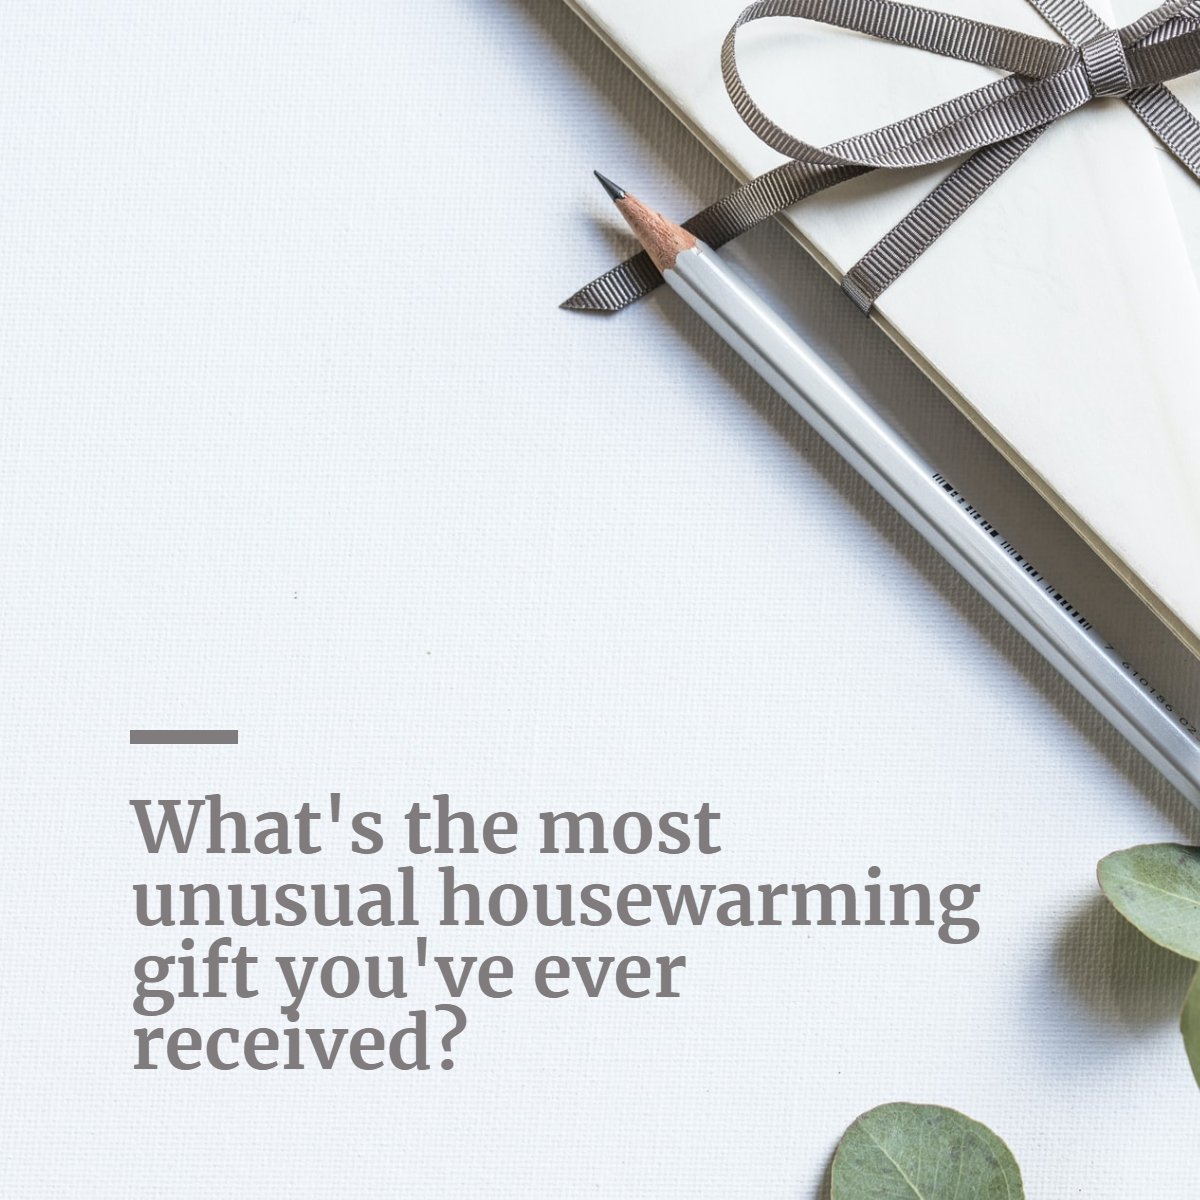 What's the most unusual housewarming gift you've ever received? 🎁

#housewarming #housewarminggift #homeowner #rentvsown #realestatefun #realestate